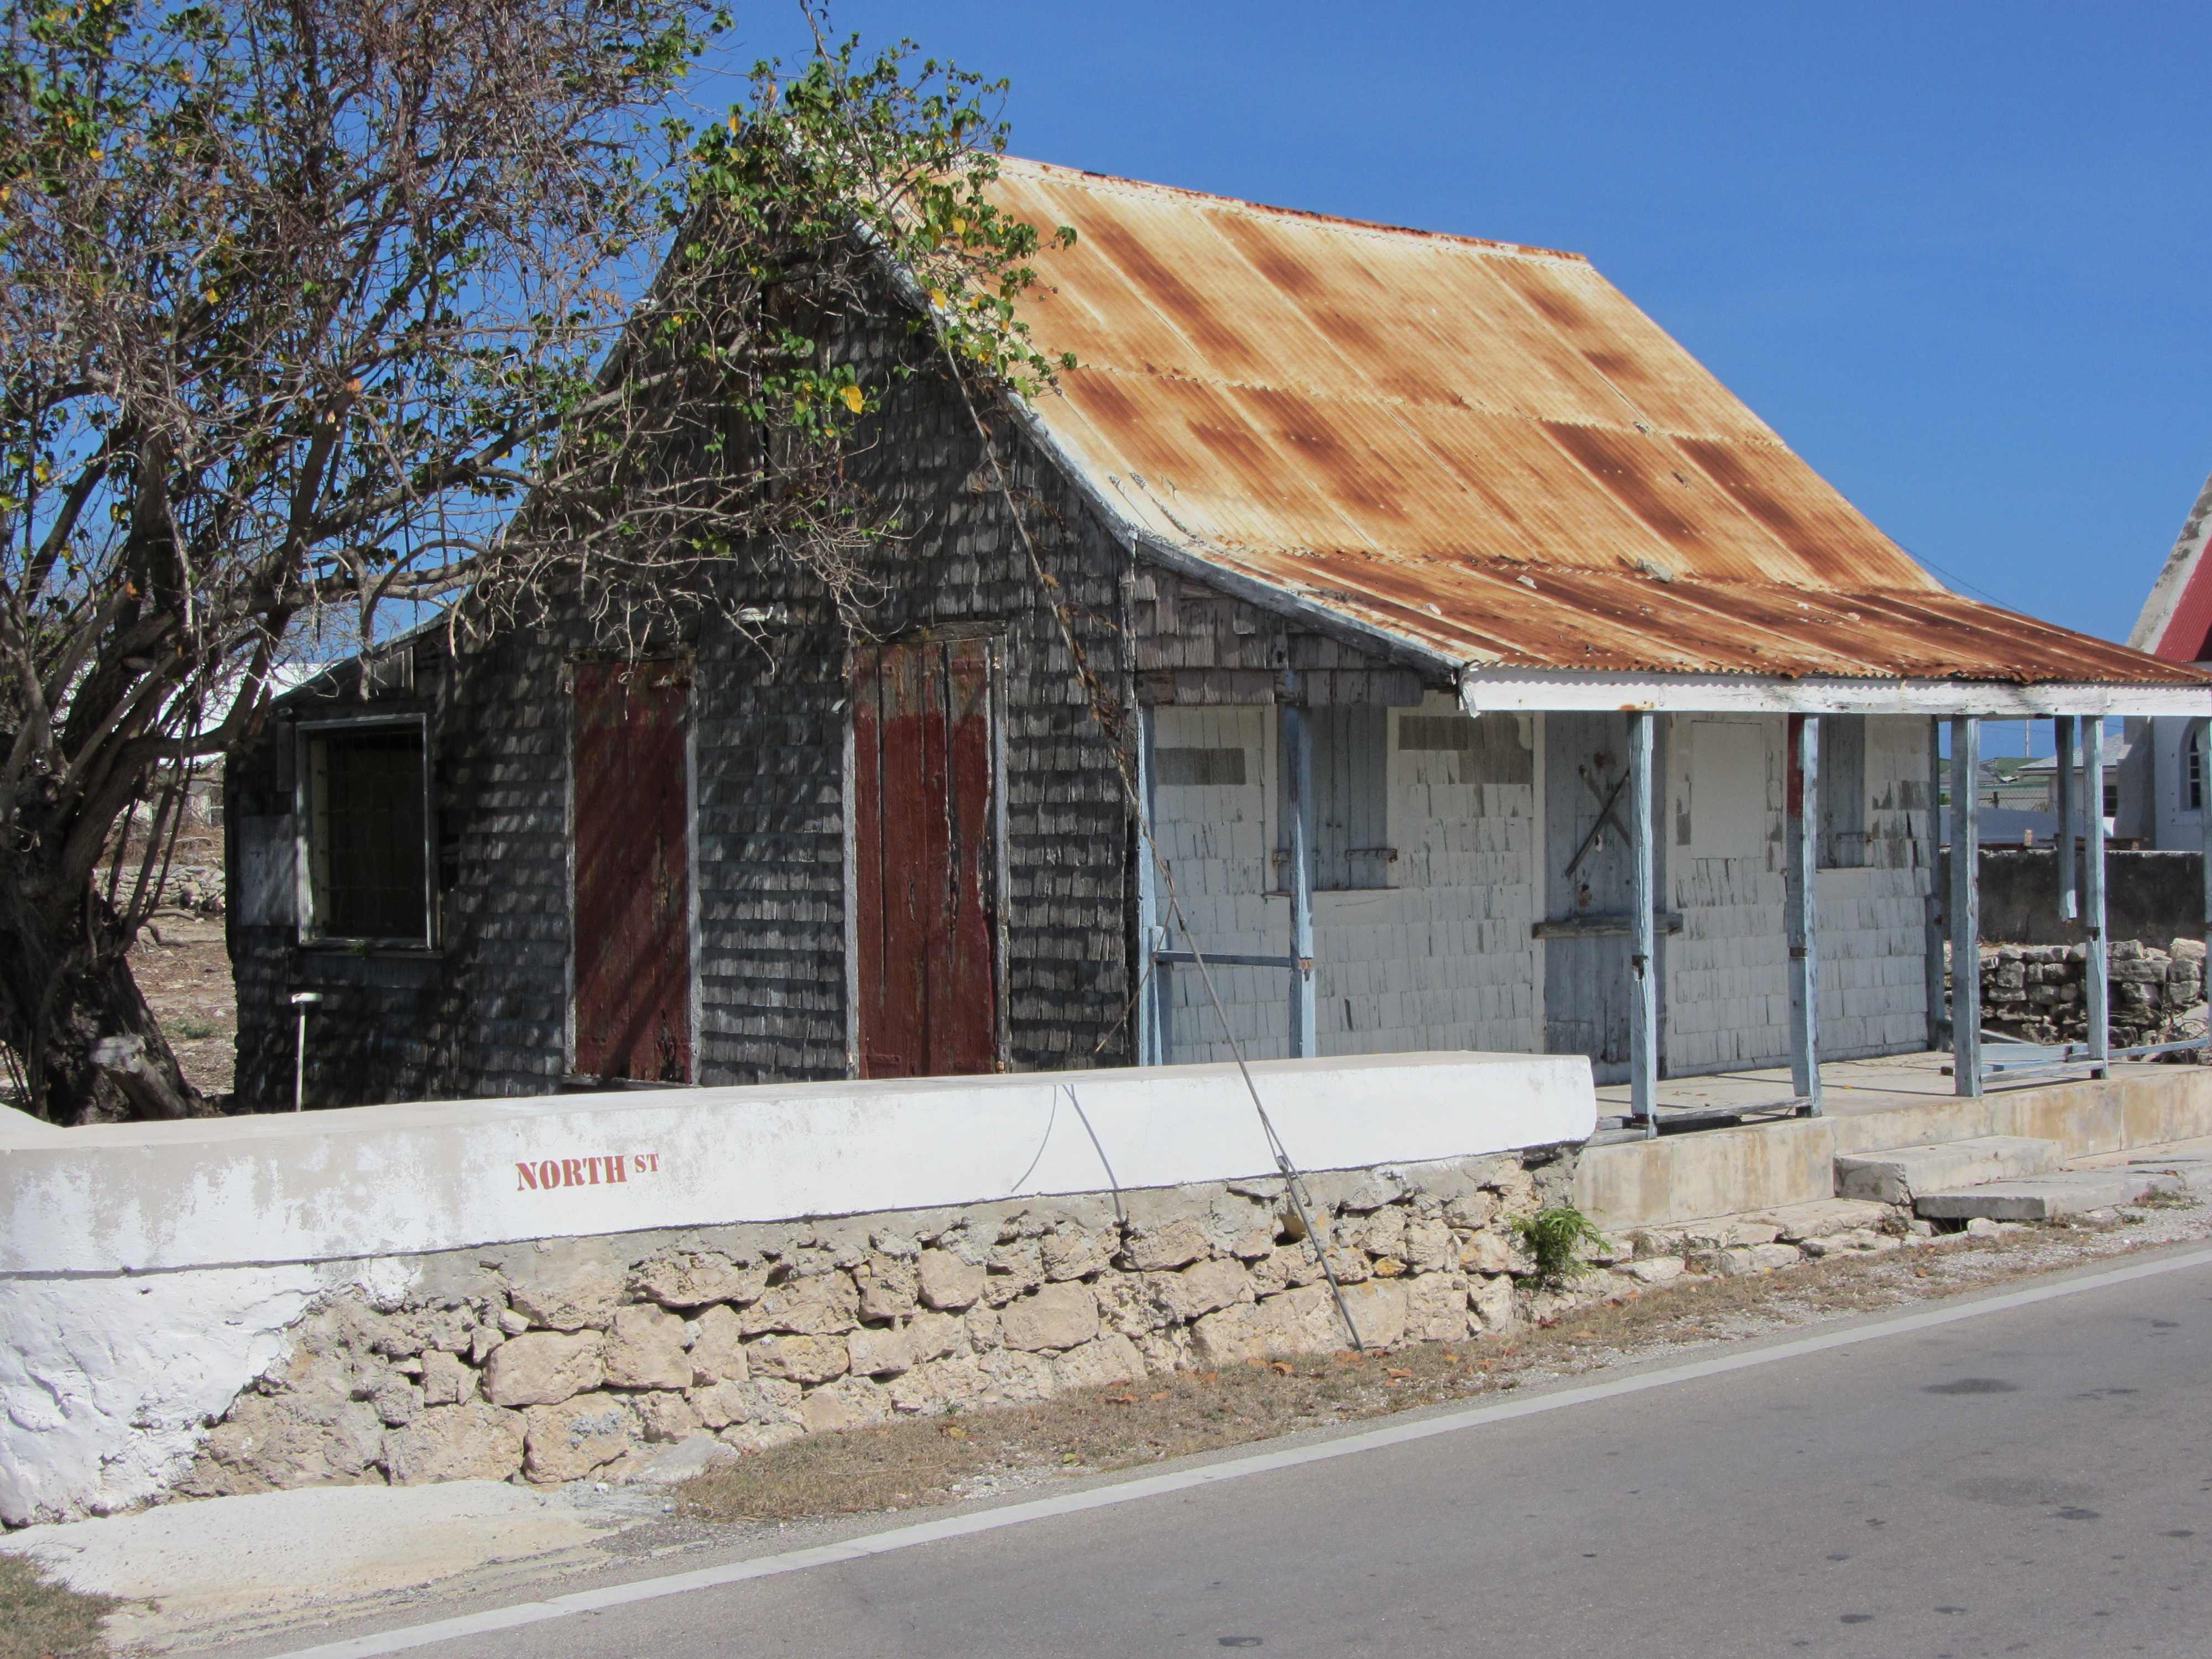 A boarded up shop on South Caicos.